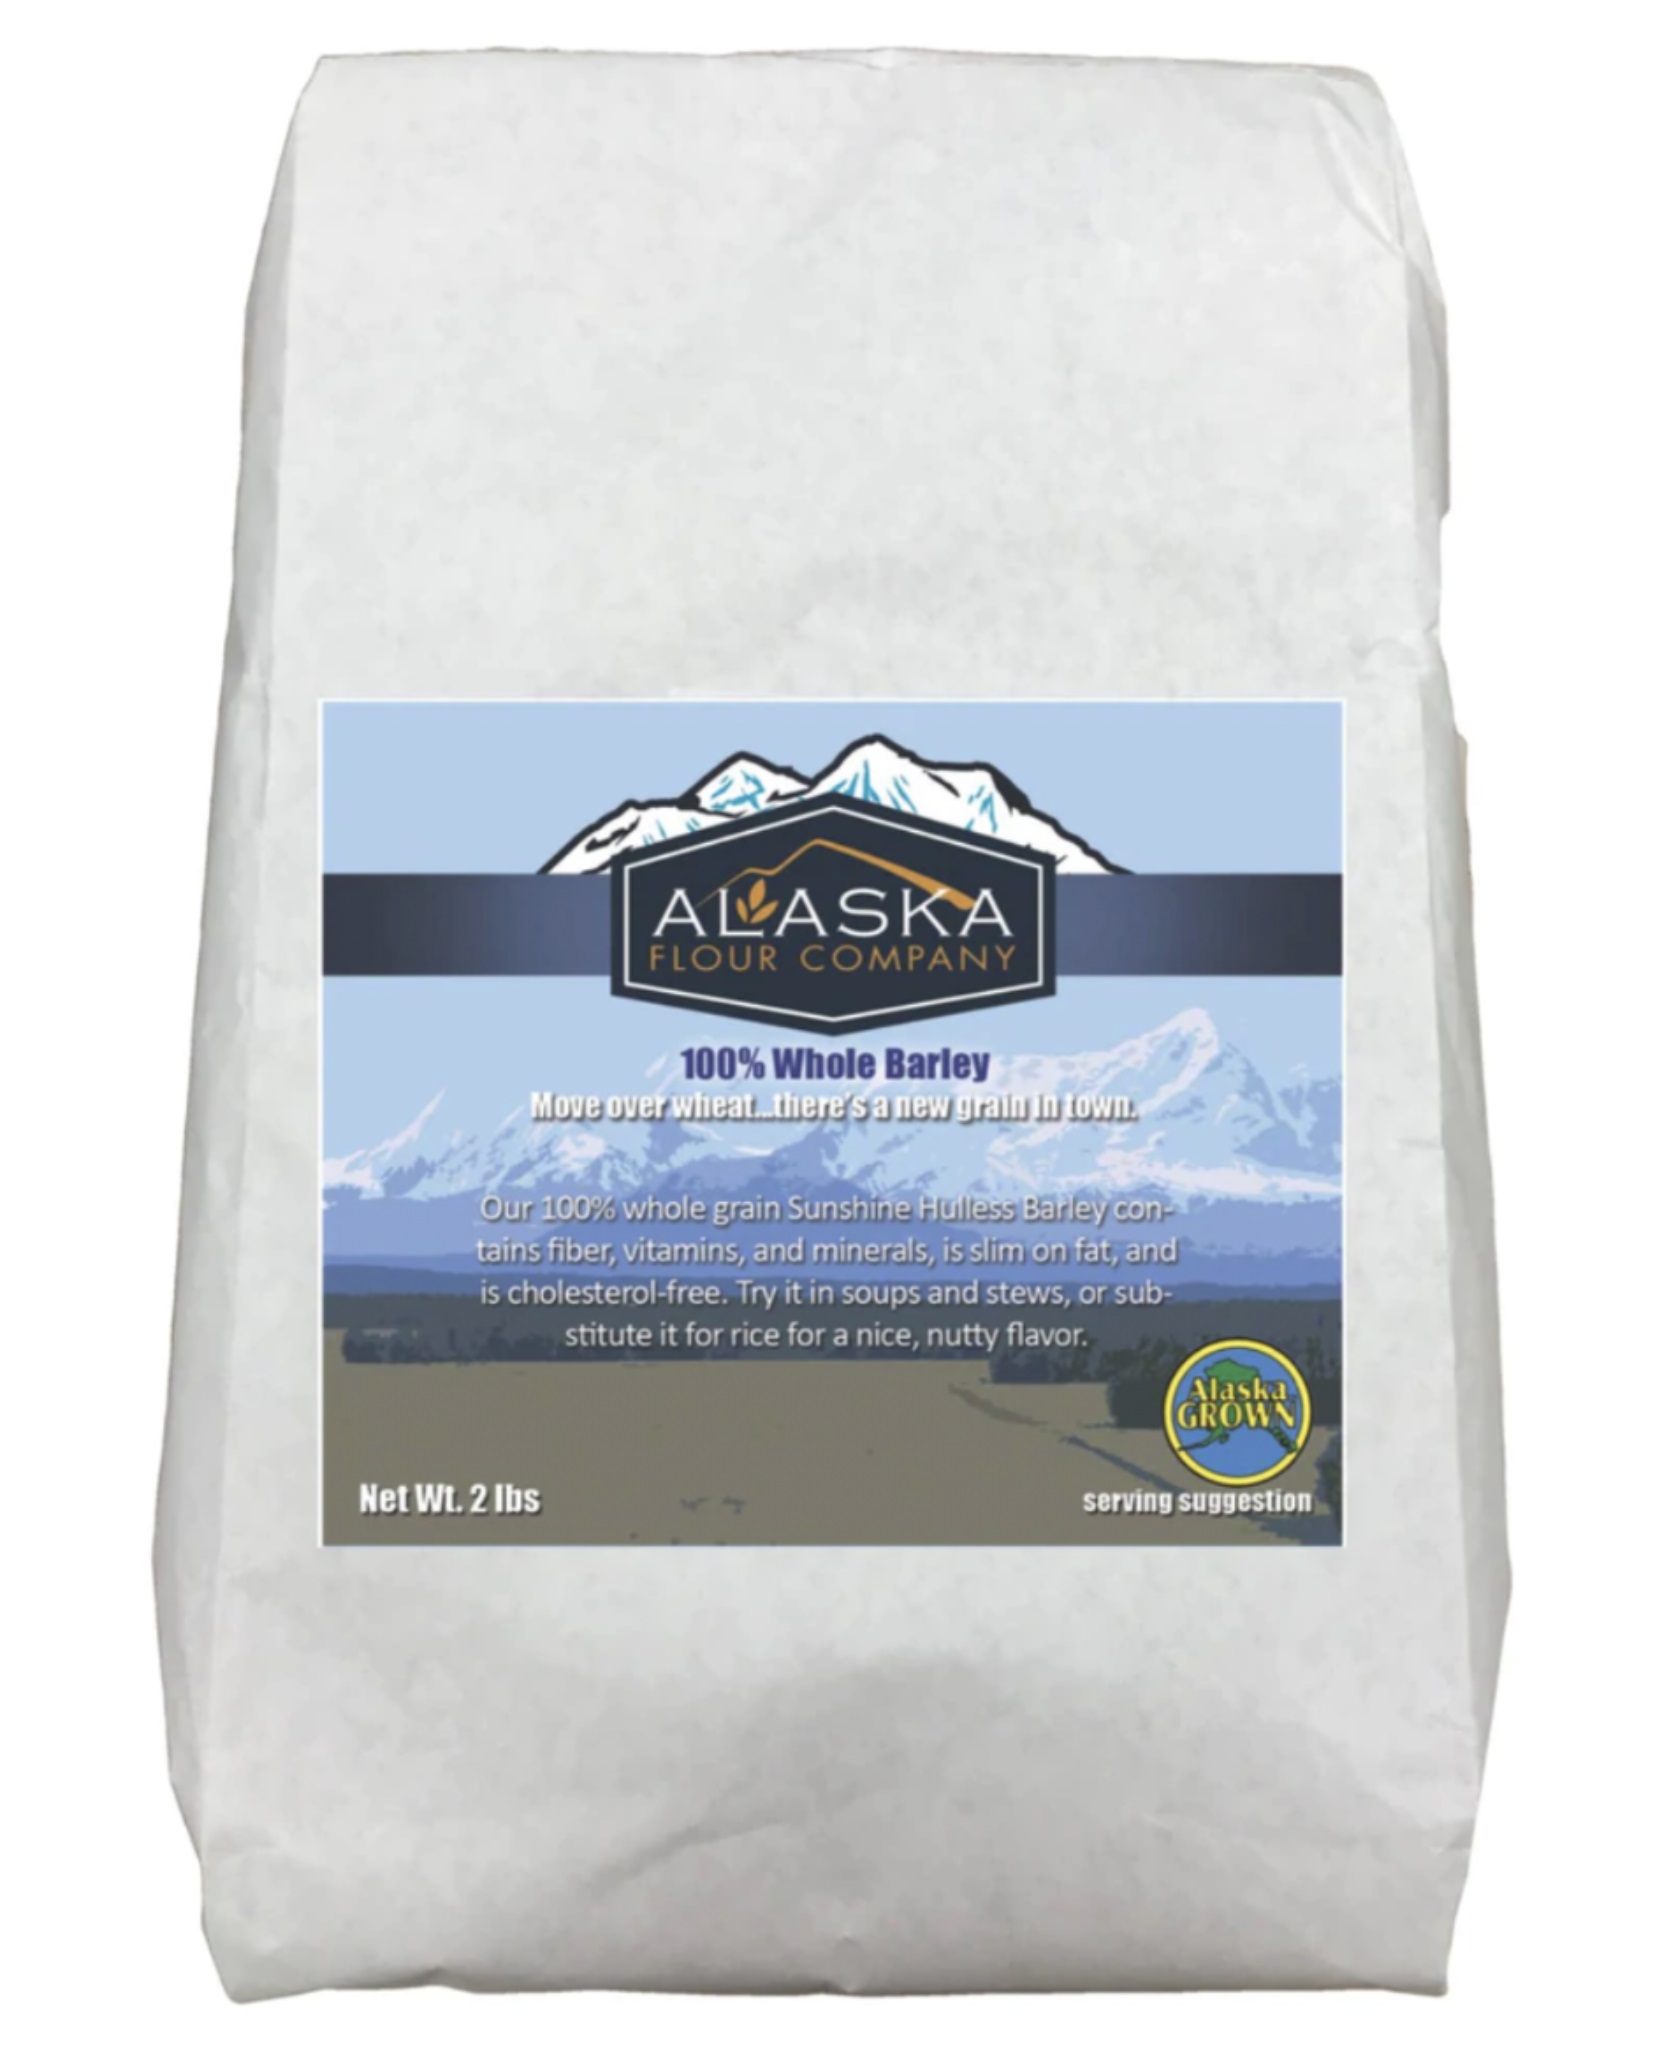 Barley Hulless 25lb AK Flour Company - Sold by PACK